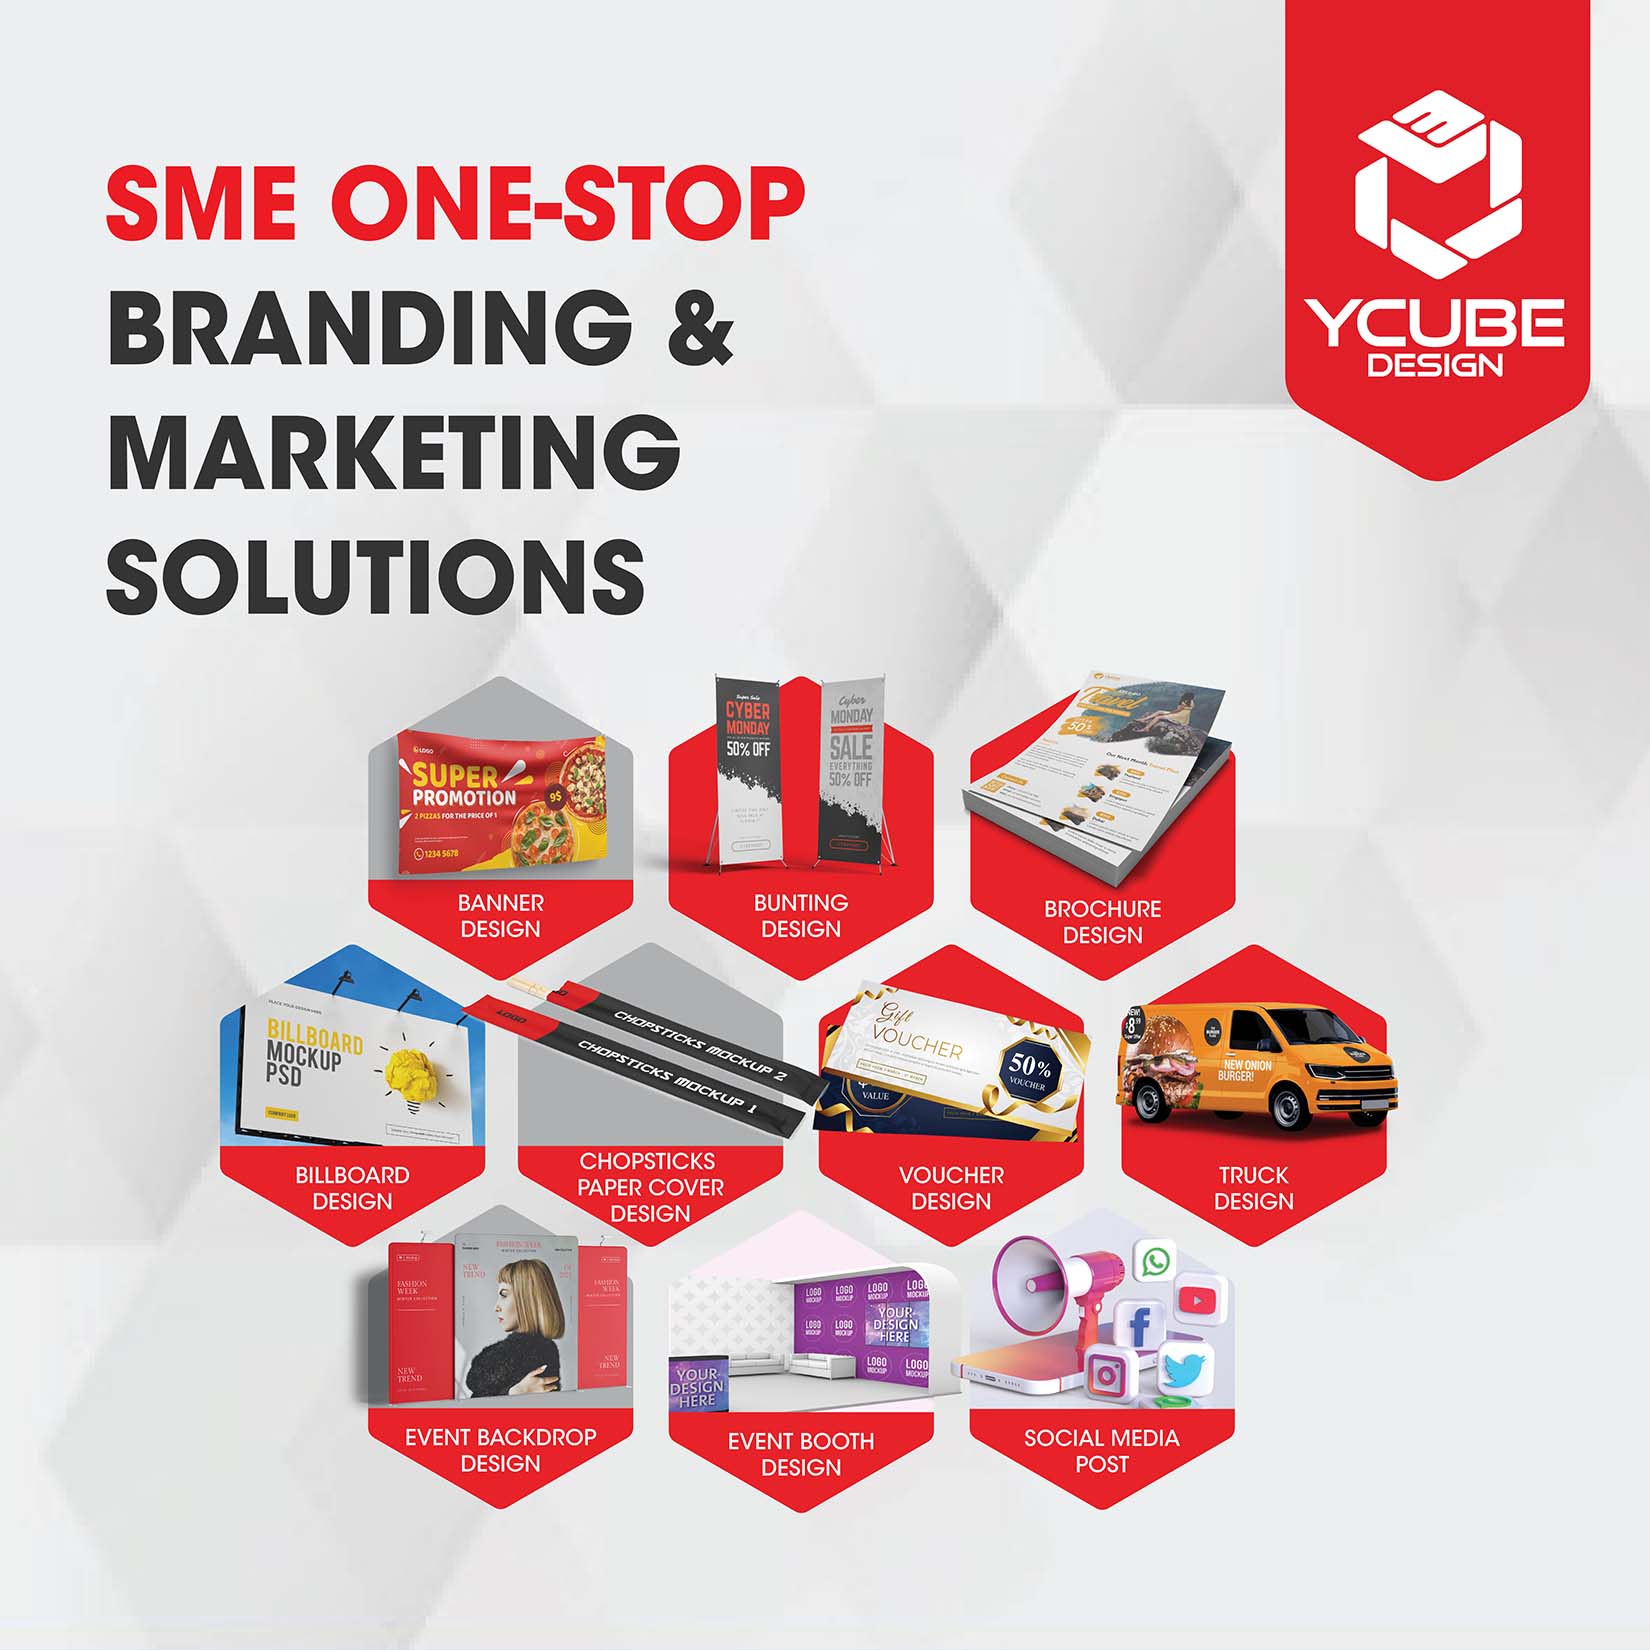 The Infinity Of Branding Solution By Ycube